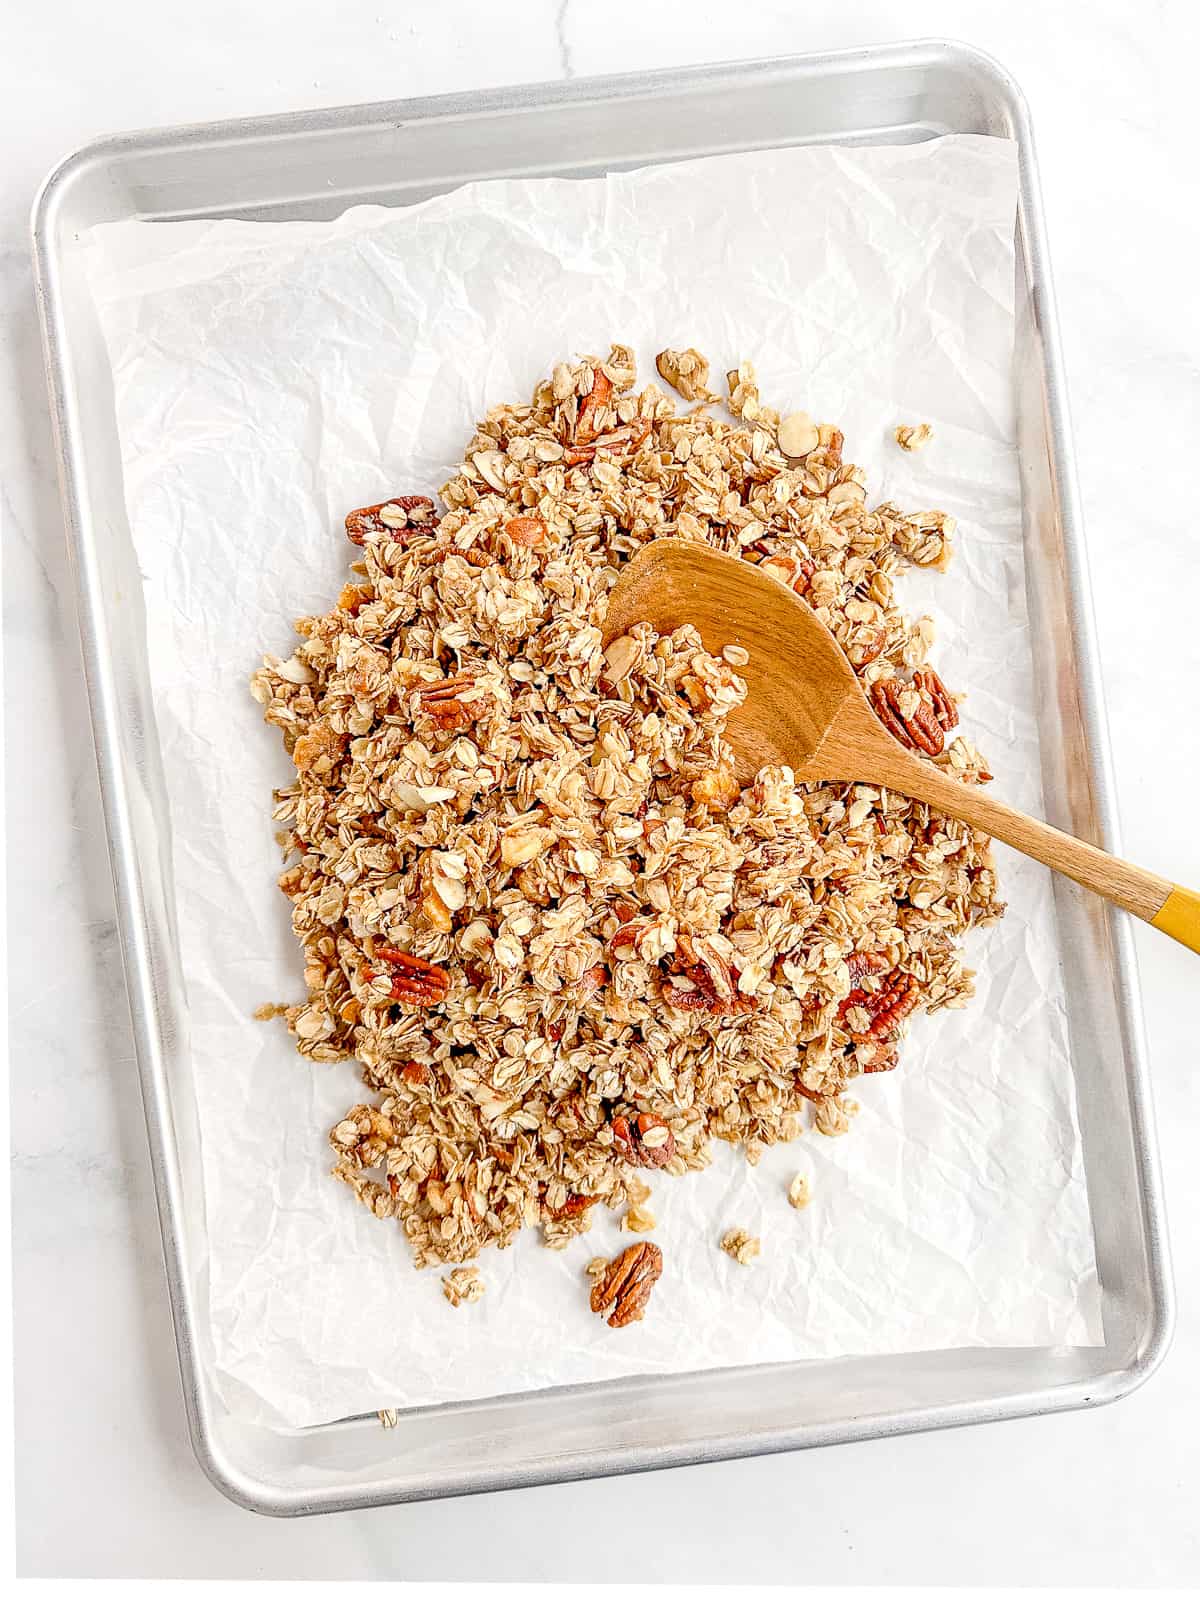 Spreading unbaked granola on a parchment paper lined sheet pan.